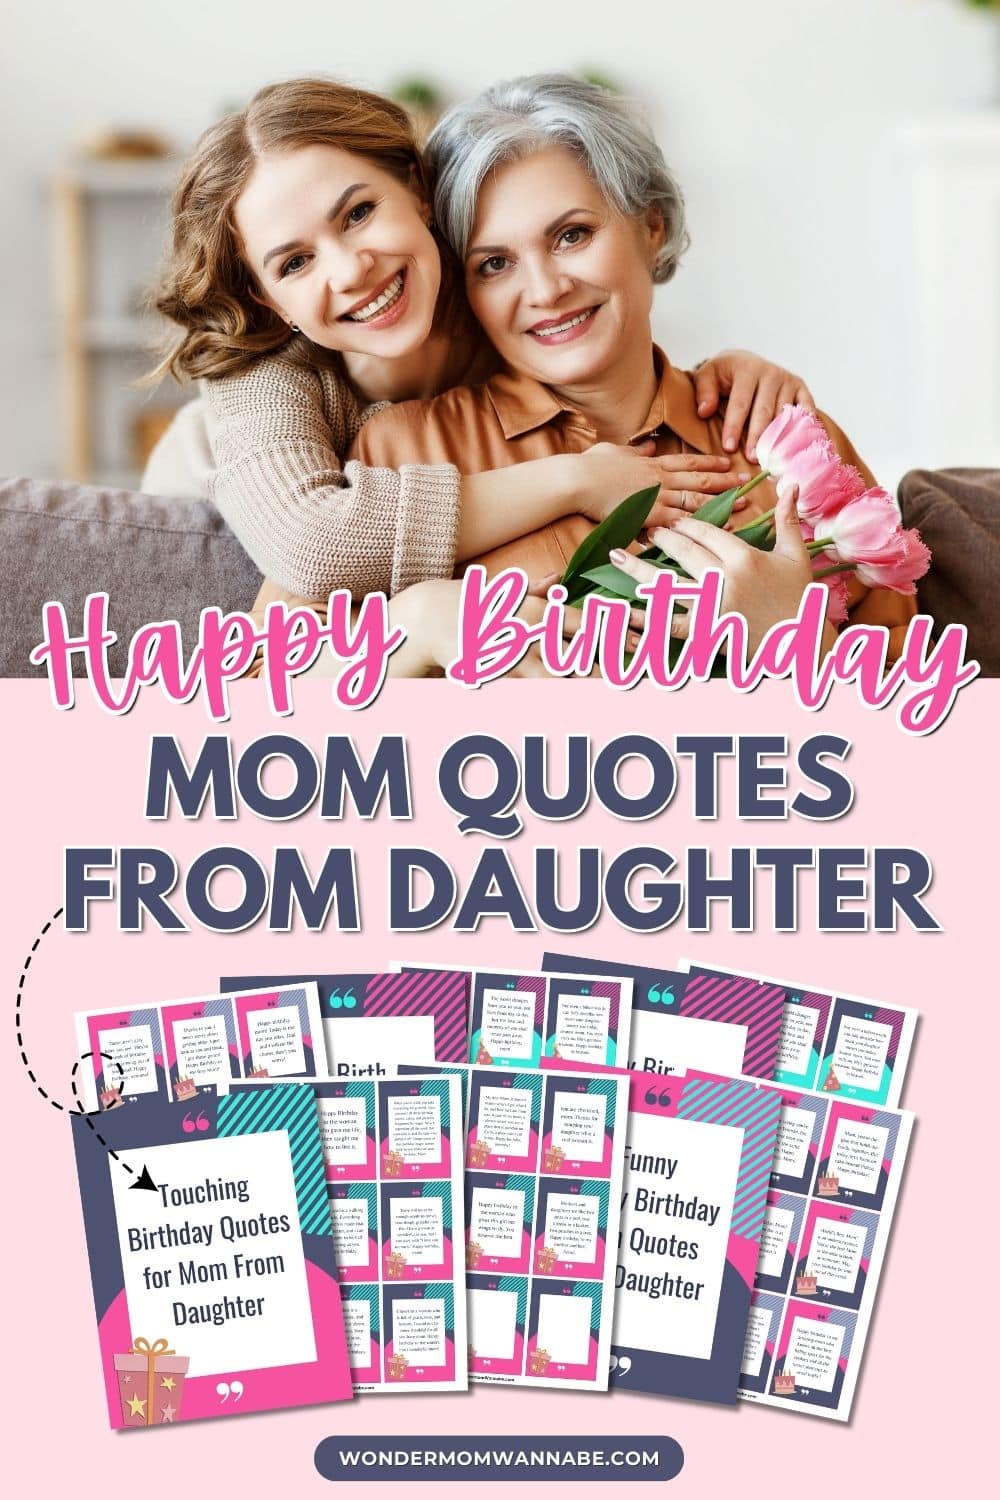 Happy birthday mom quotes from daughter.